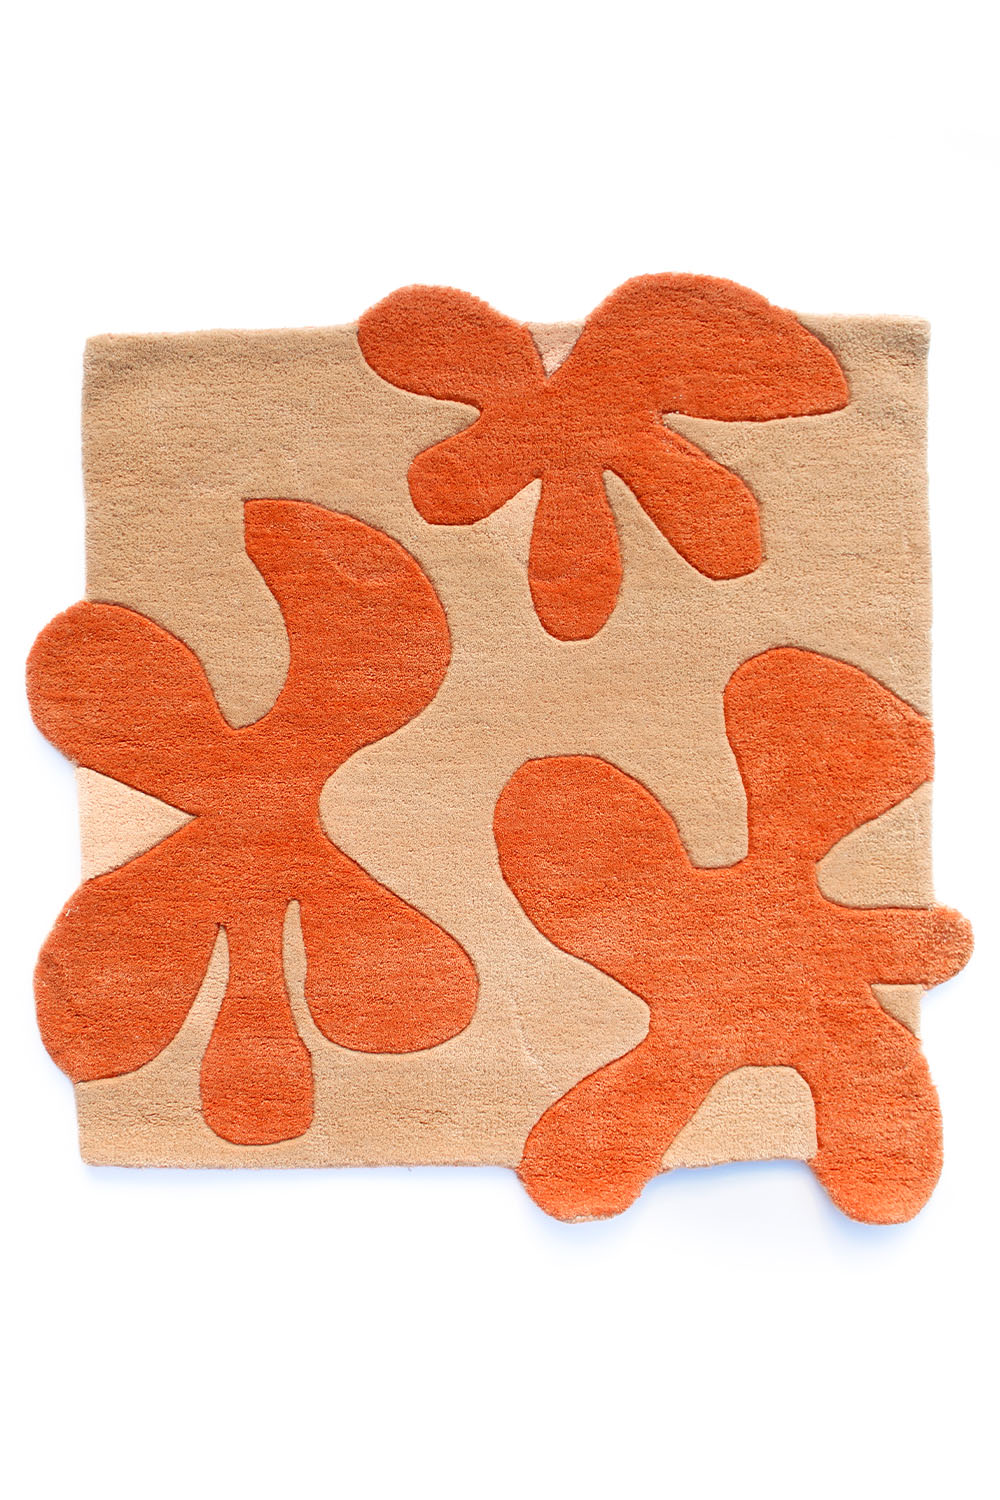 Blossom Square Hand Tufted Wool Rug in Orange by Jubi